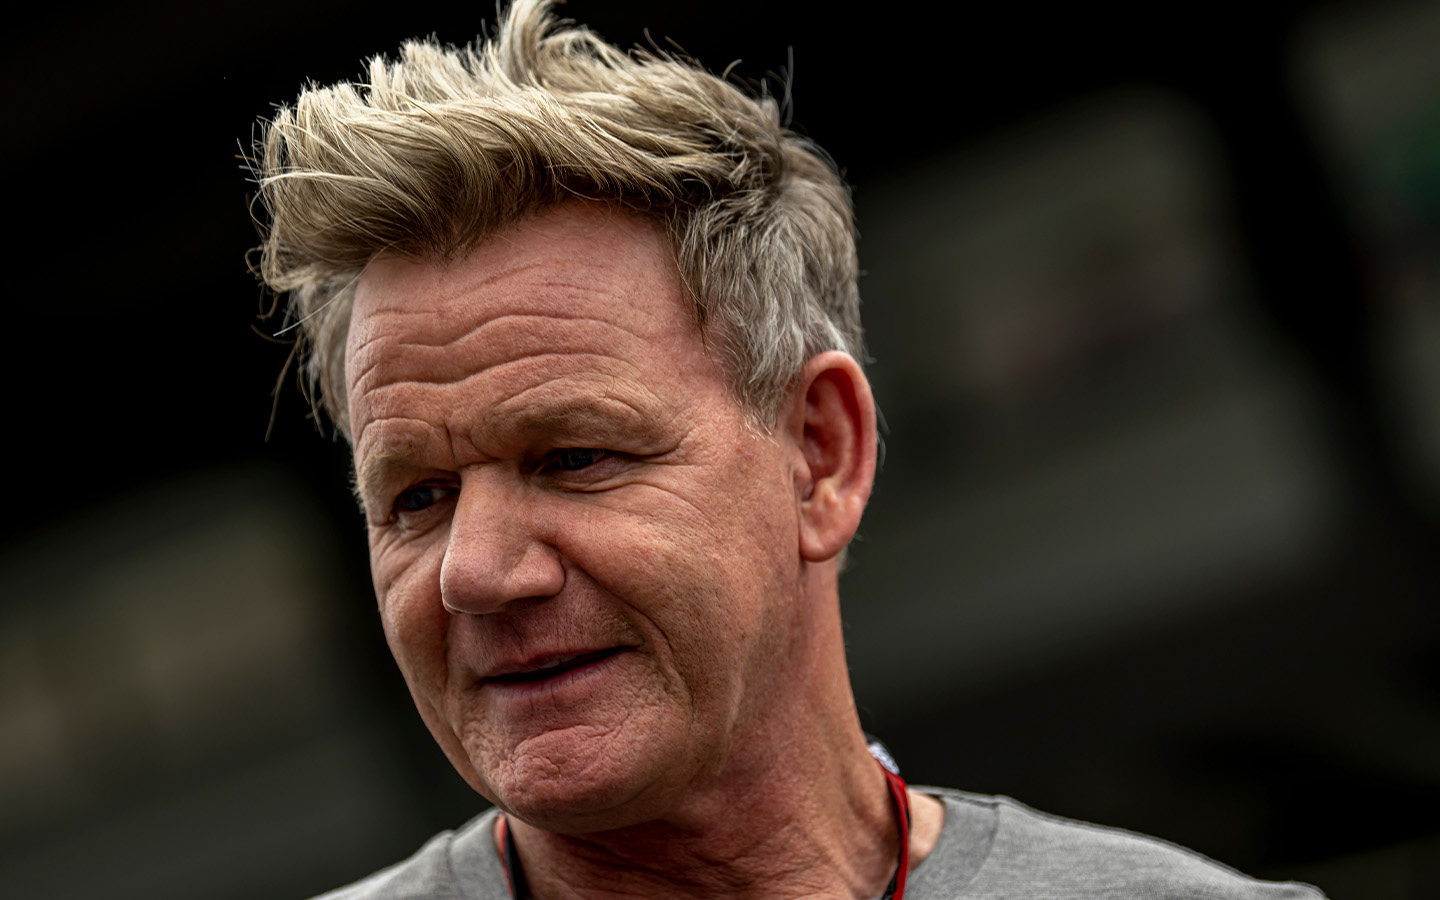 Squatters are occupying a London property leased by Gordon Ramsay